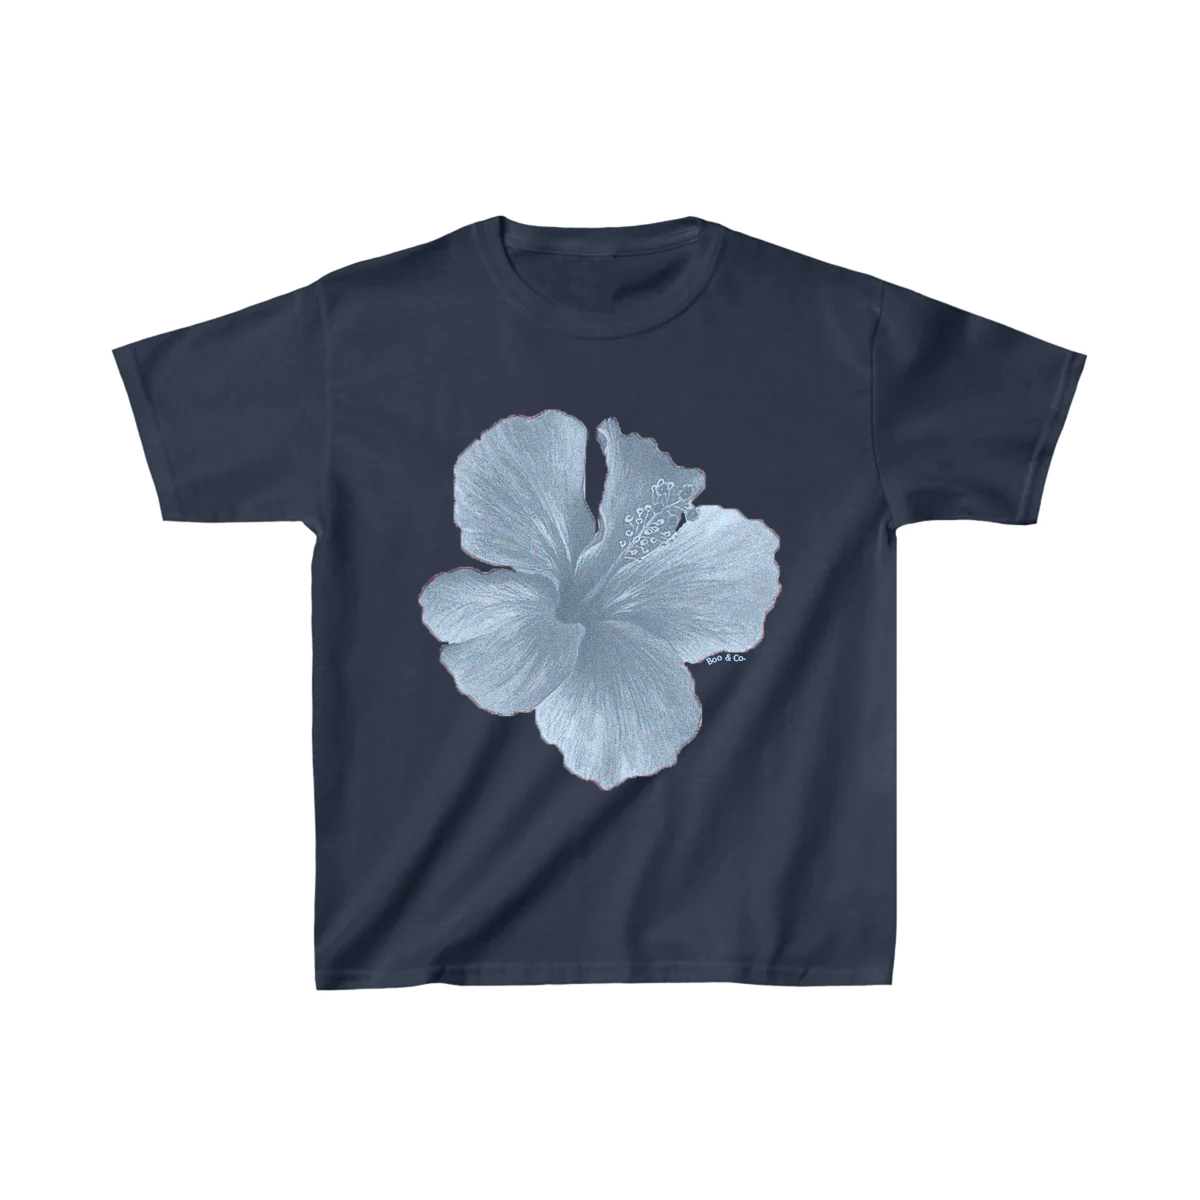 Solo Hibiscus Short-Fit Tee